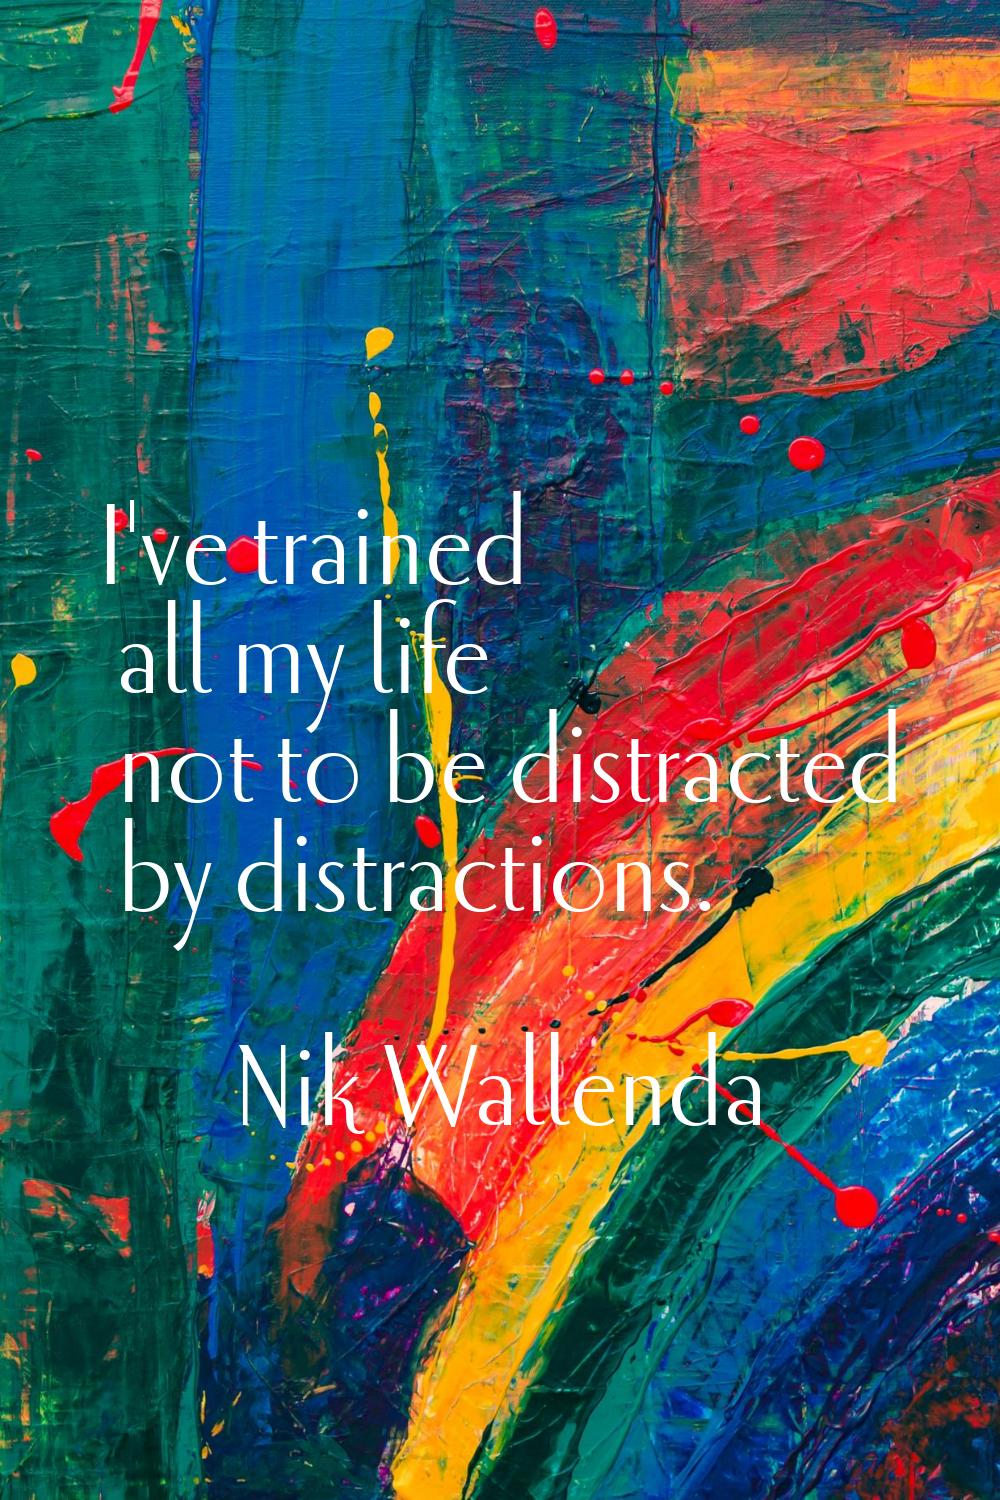 I've trained all my life not to be distracted by distractions.